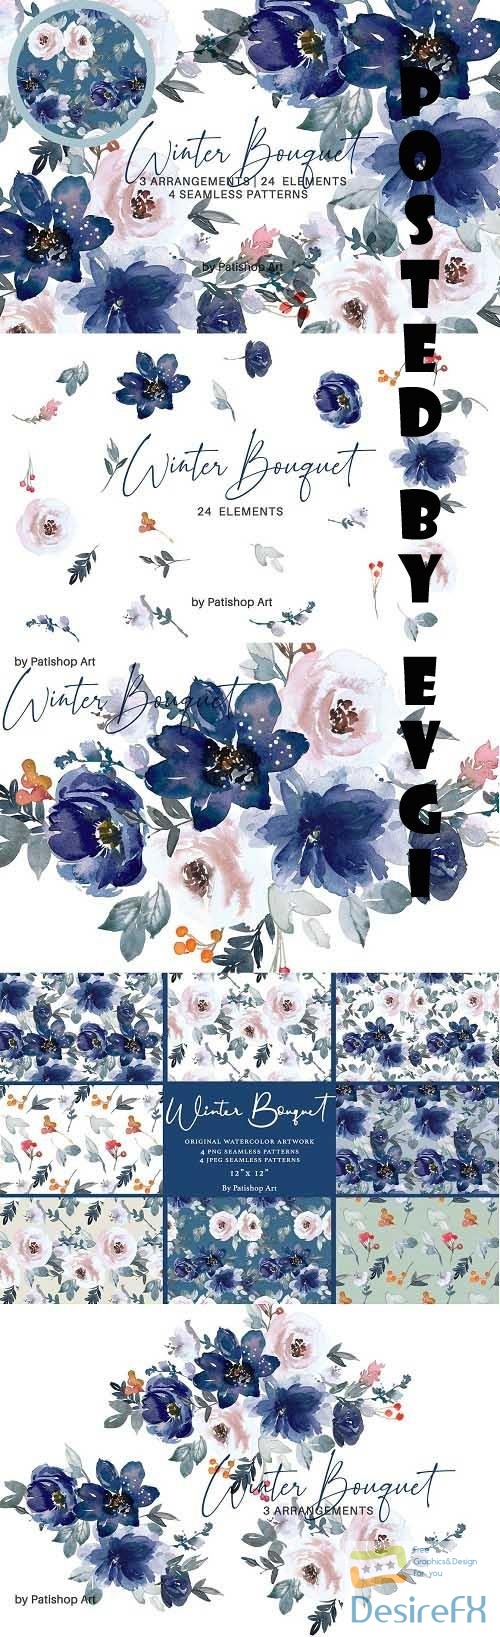 Floral Clipart & Seamless Patterns - 6622556